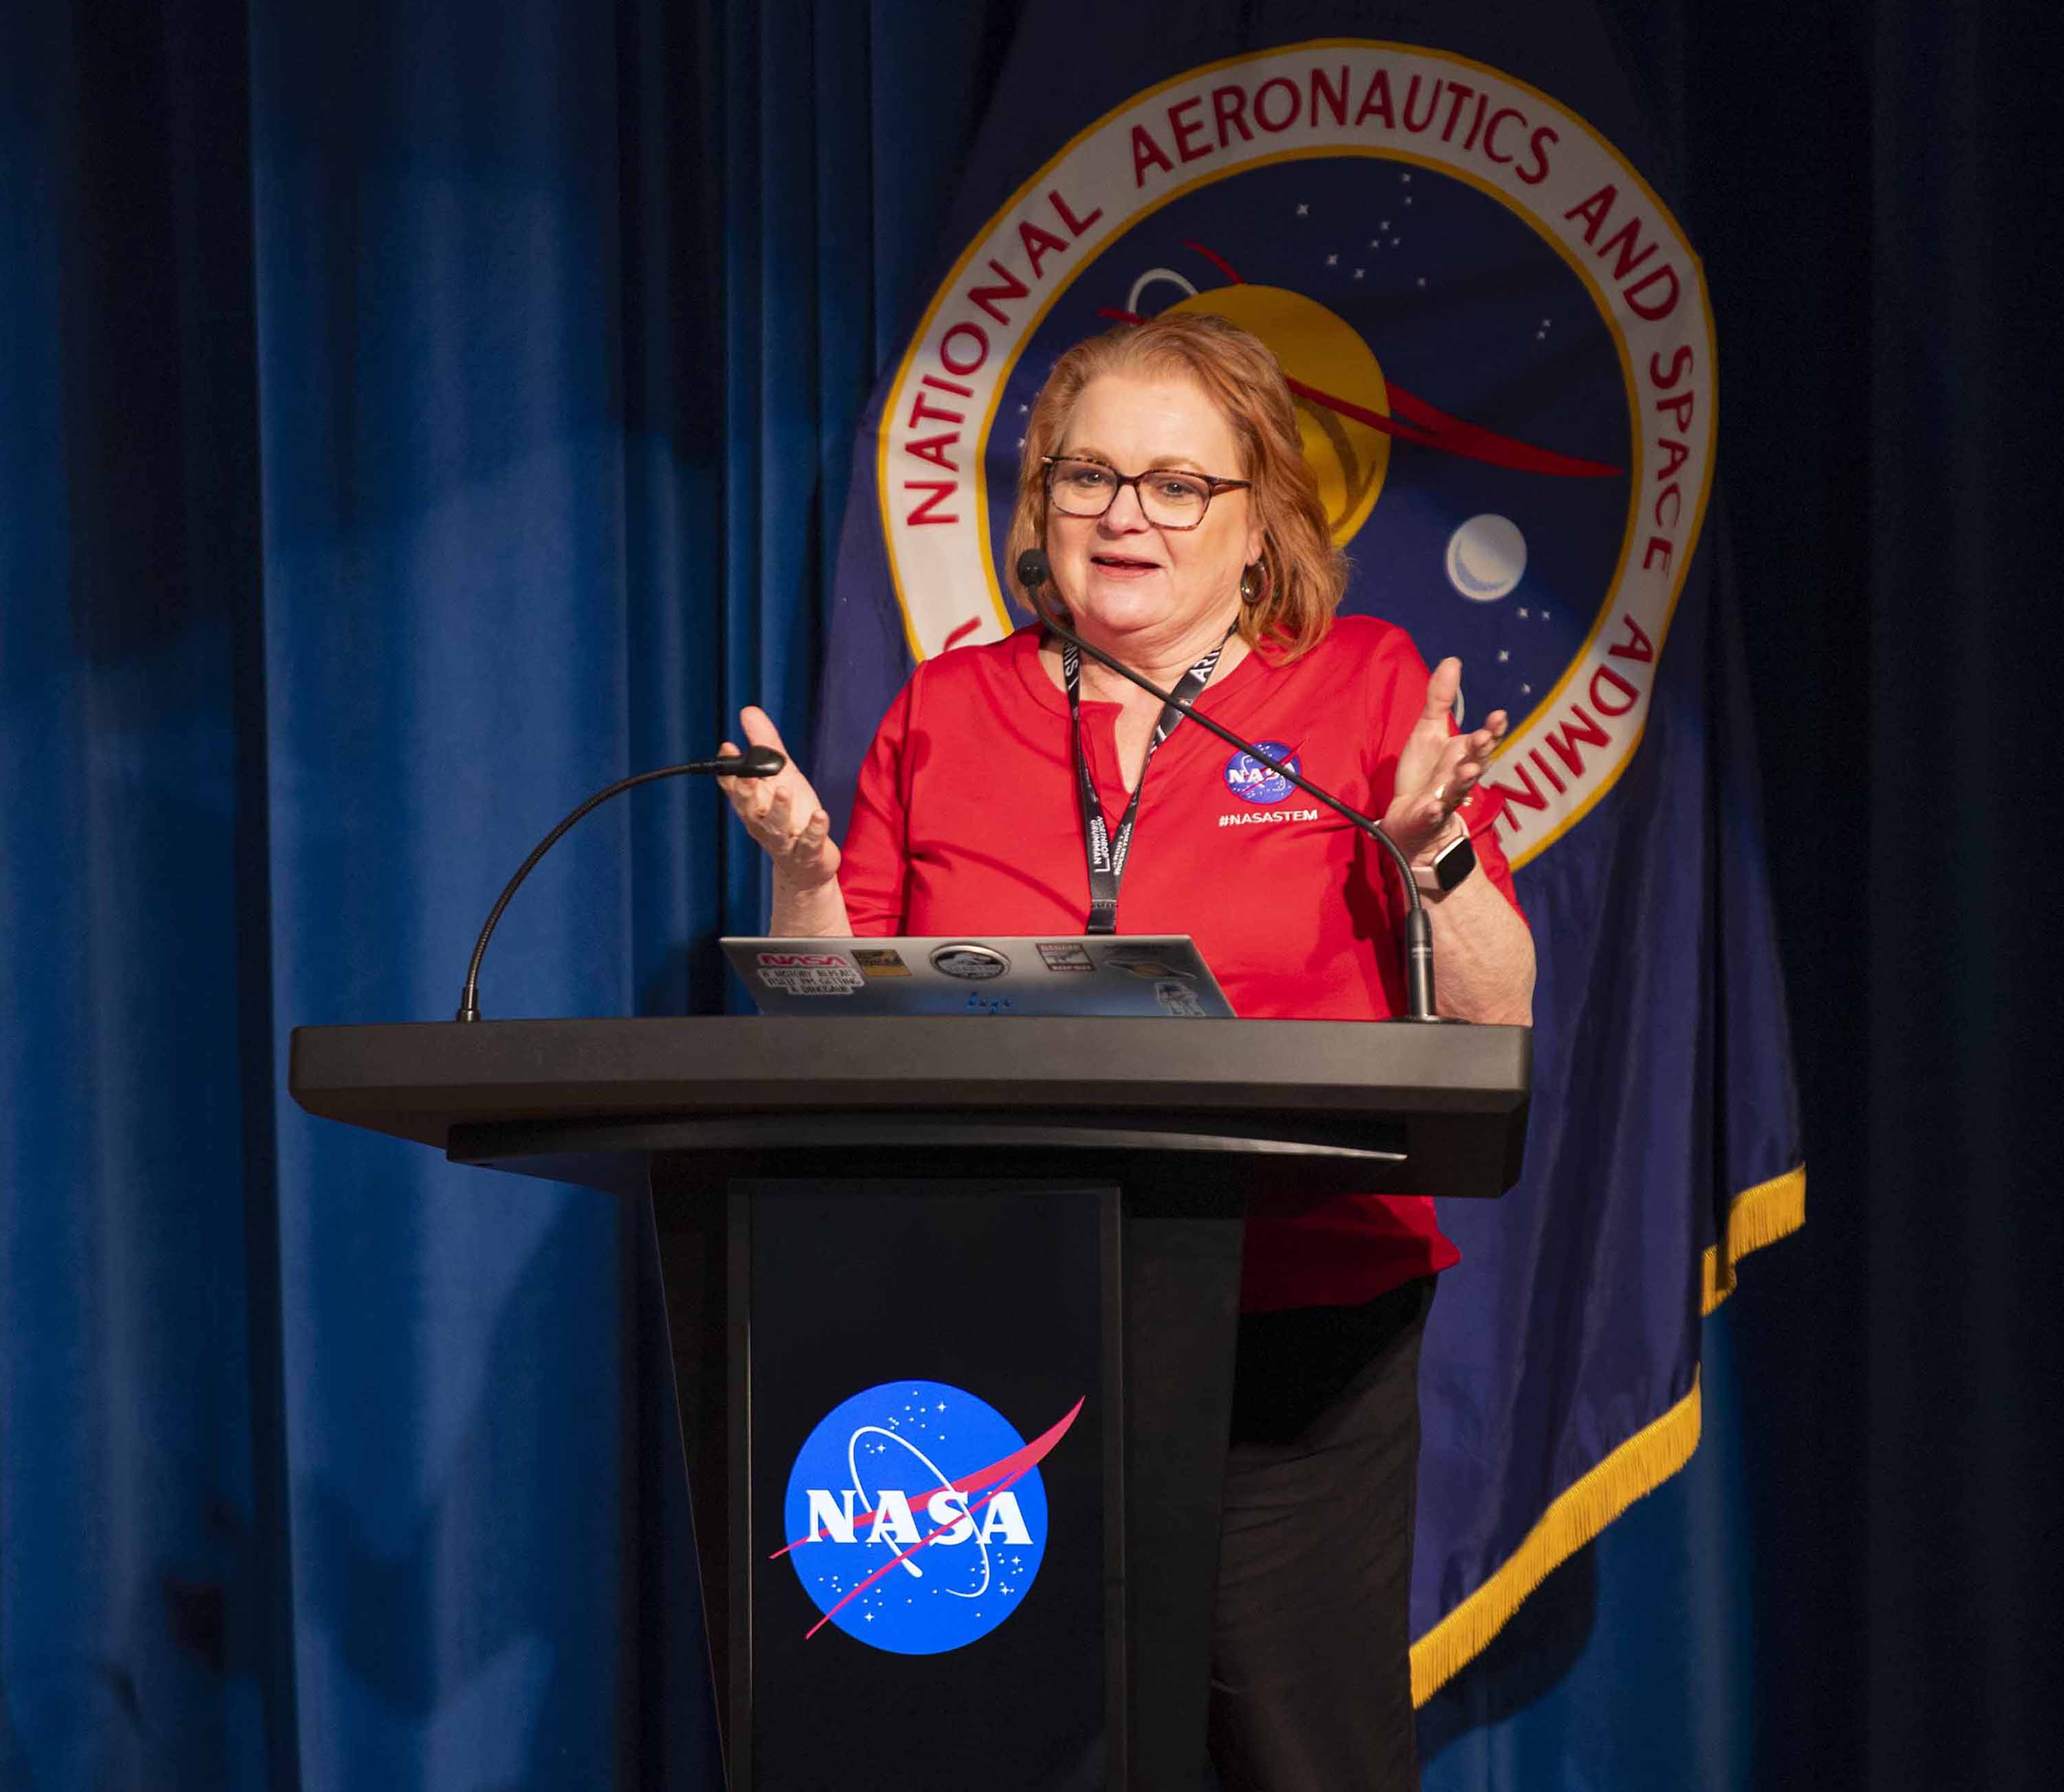 A woman, Next Gen STEM Project Manager Dr. Carrie Olsen, wearing a red polo with NASA meatball, speaks from behind the lectern